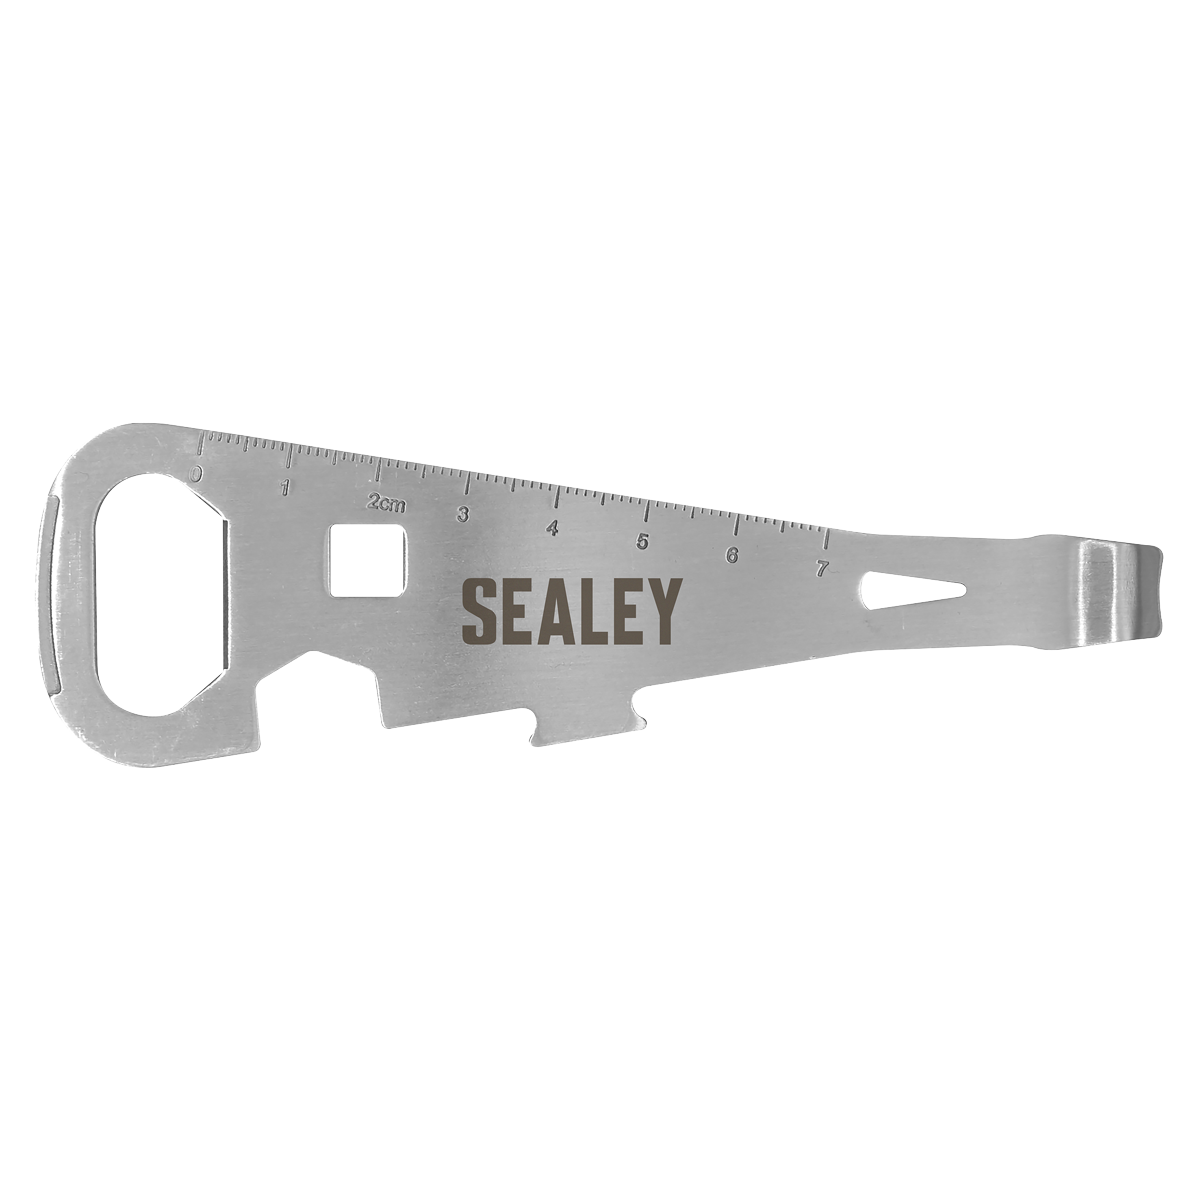 7 FUNCTIONS - Functions include: Can Opener, Bottle Opener, Ruler, Nail Puller, 8mm Nut Wrench, 13mm Hex Wrench, Screwdriver.